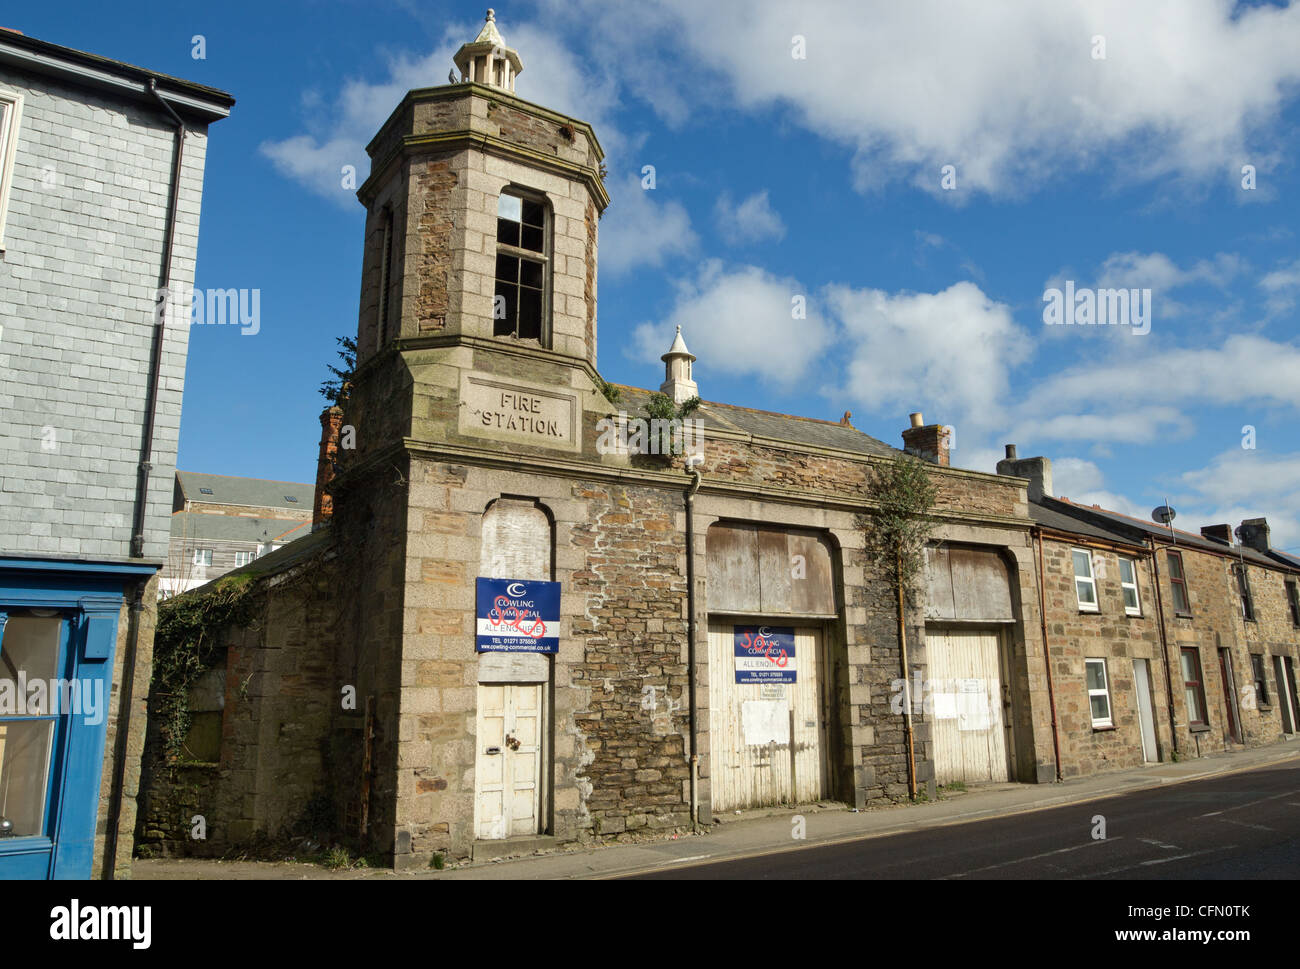 The old Fire Station in Redruth, Cornwall UK. Stock Photo